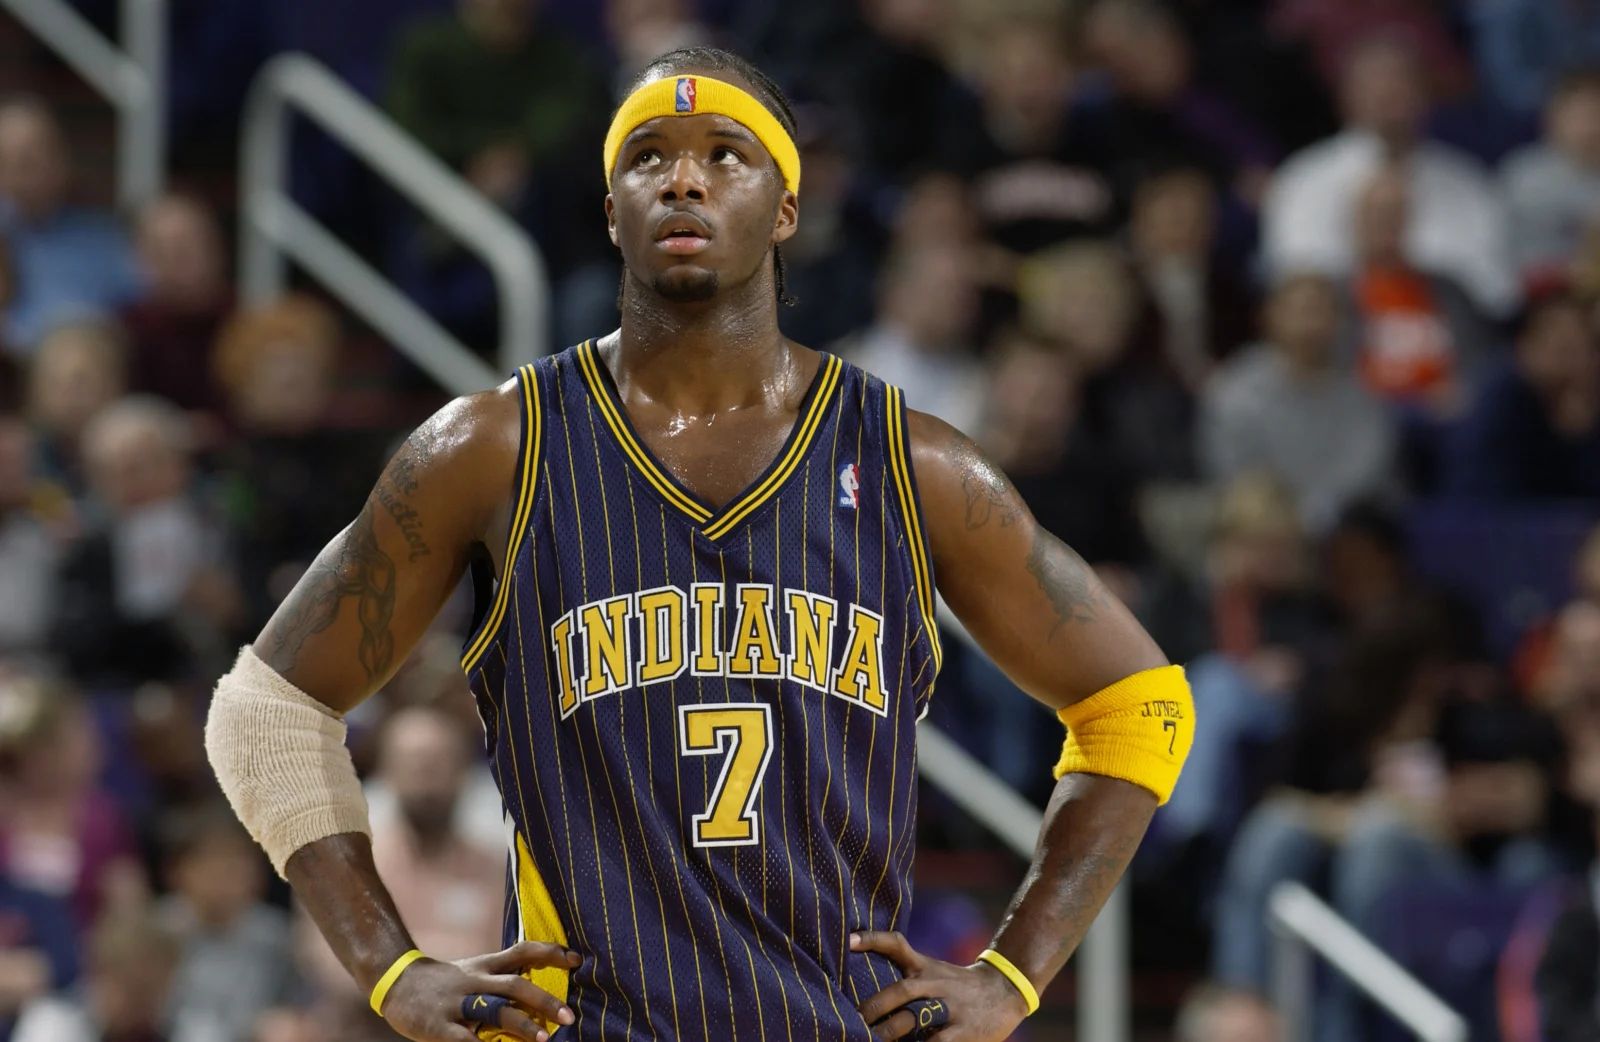 pacers-legend-jermaine-oneal-expresses-disappointment-over-buddy-hield-wearing-7